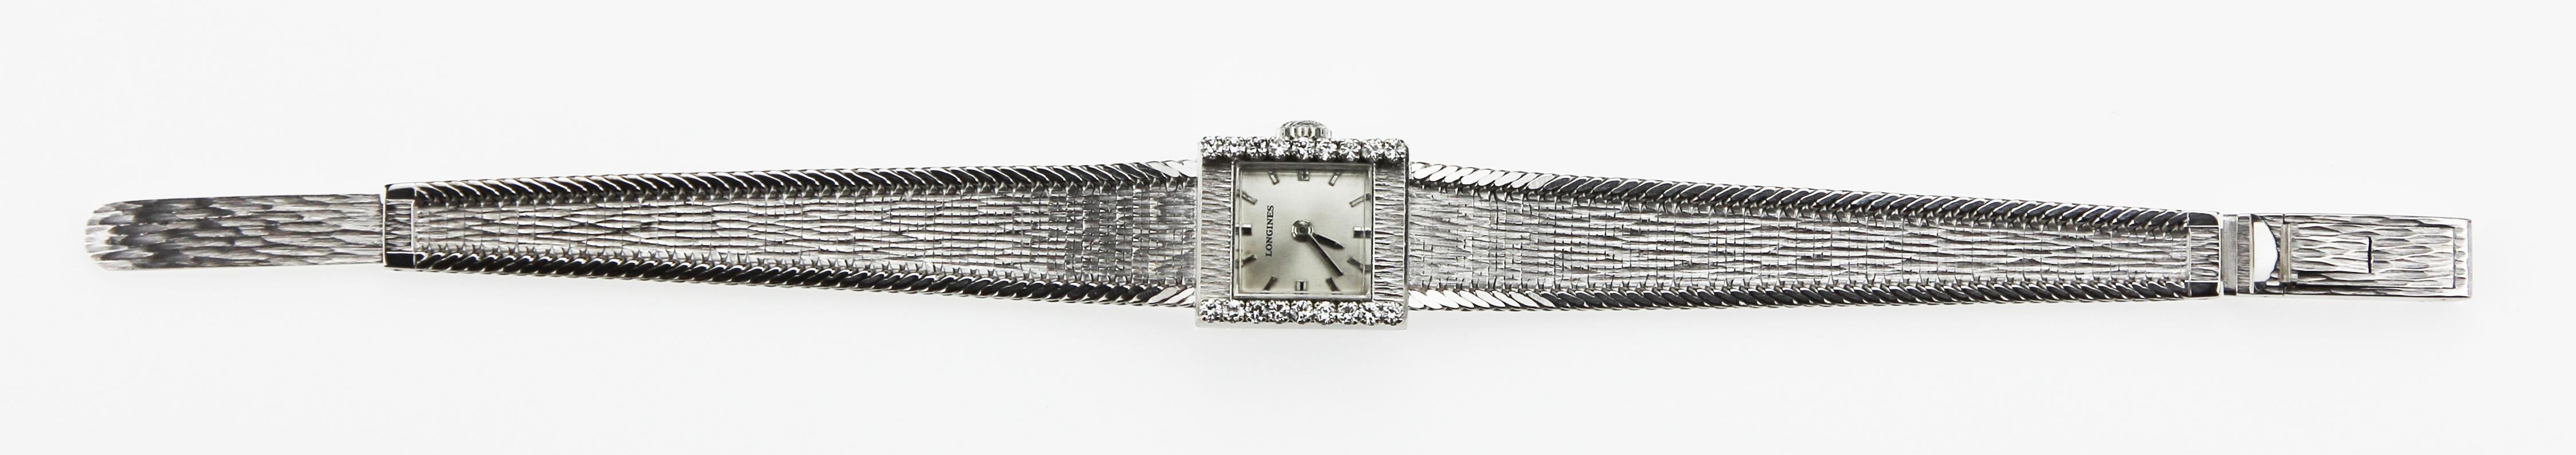 Longines 18 carat white gold watch with a simplistic square shaped face with a thick gorgeous gold textured border and two shoulder sides that are encrusted with diamonds. The wrist strap is an elegant thin flexible band with a gorgeous snake skin